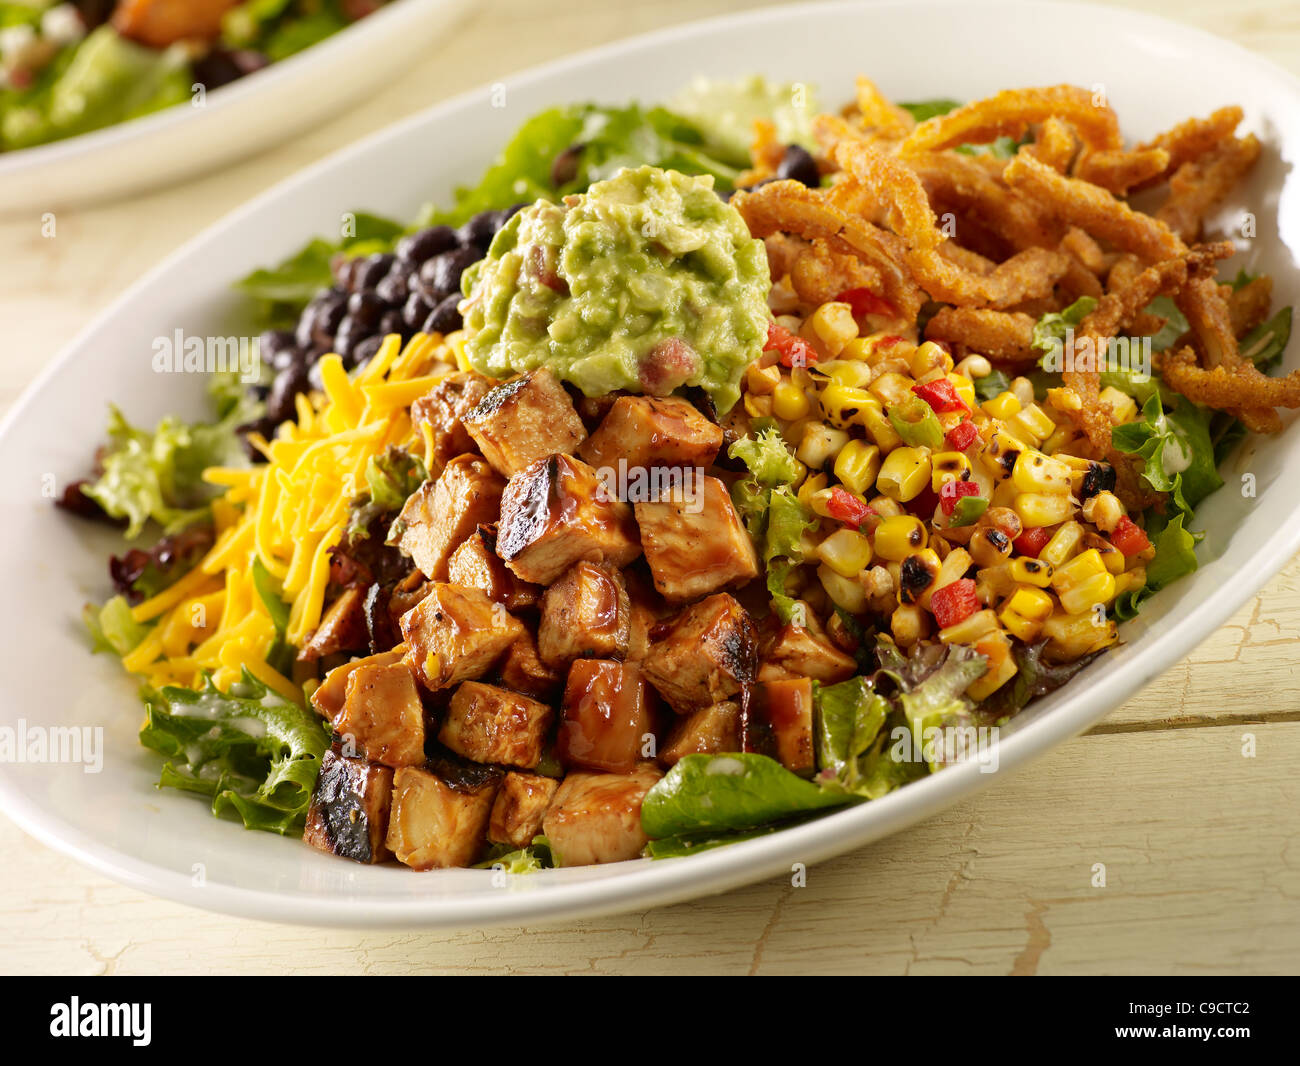 Chopped barbecue chicken salad with lettuce corn, black beans, cheese, onion rings and guacamole Stock Photo